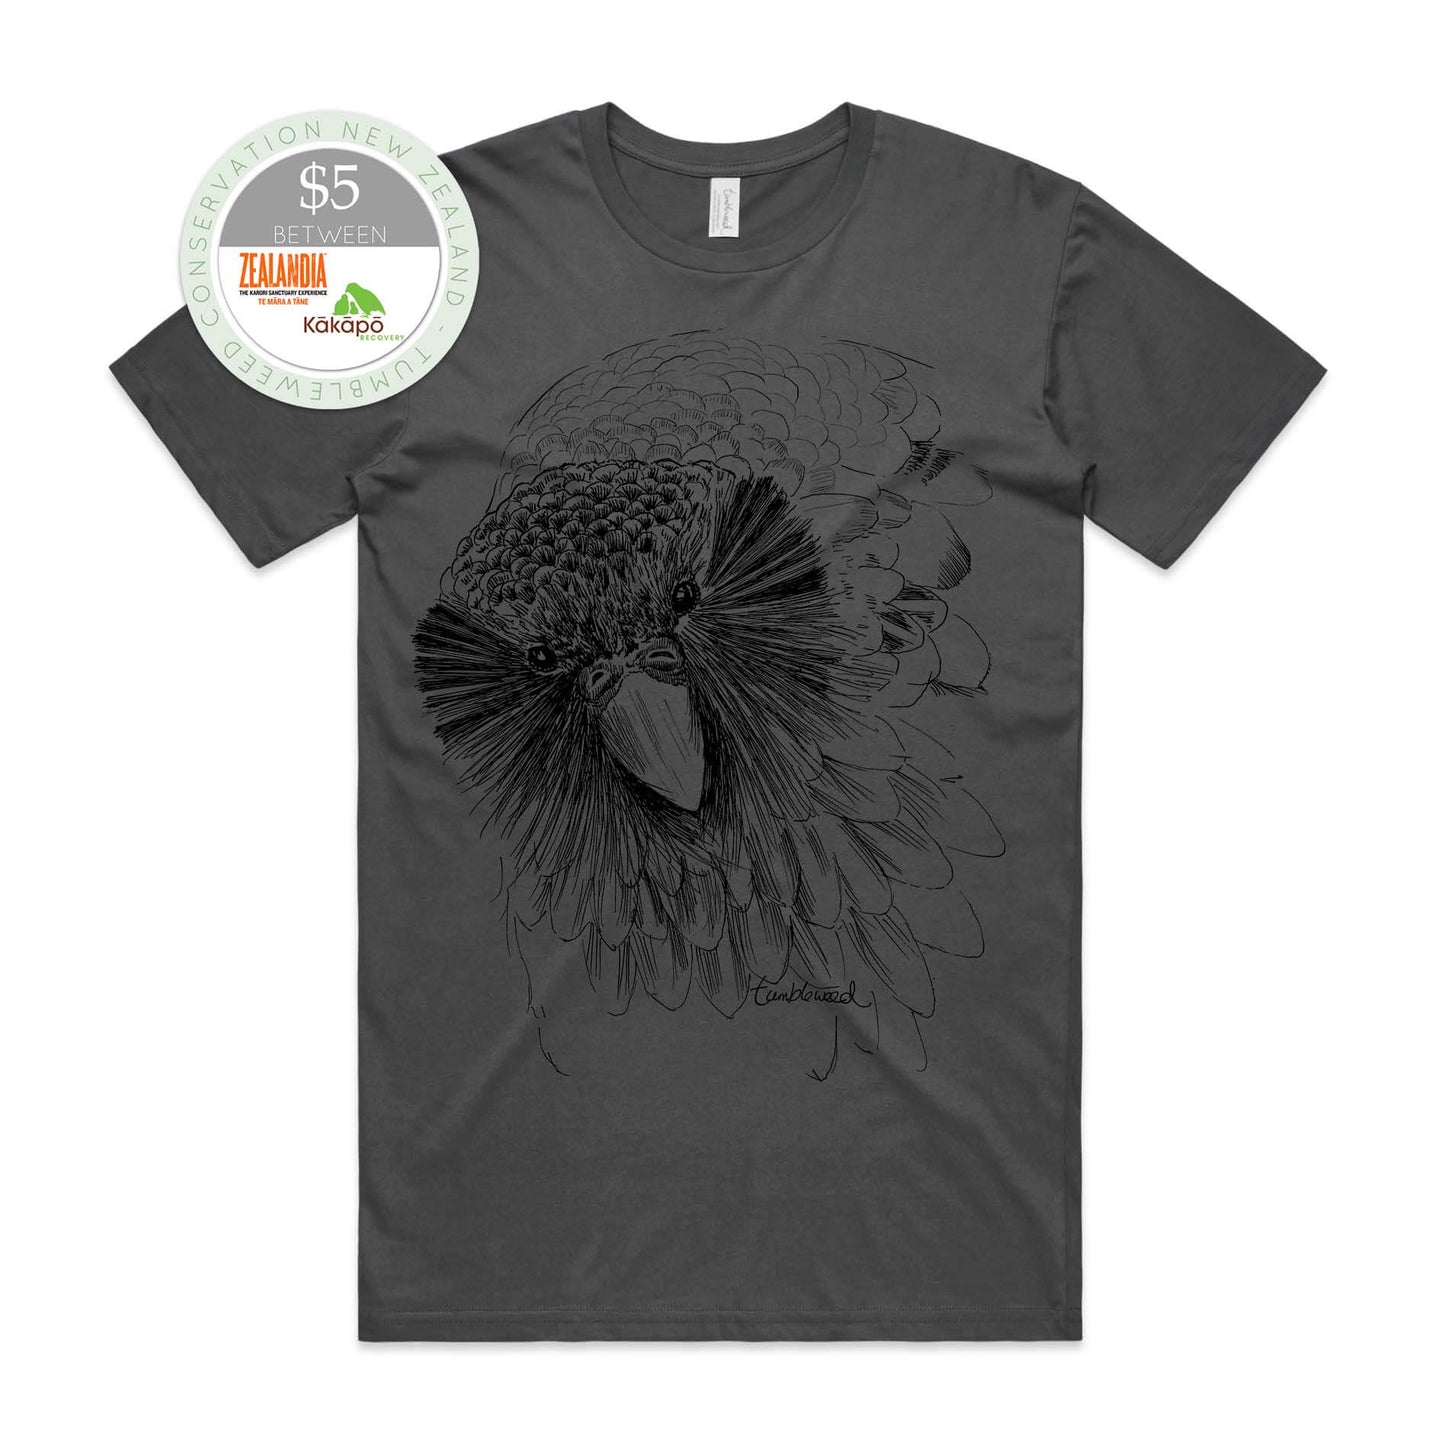 White, female t-shirt featuring a screen printed Sirocco the Kākāpō design.